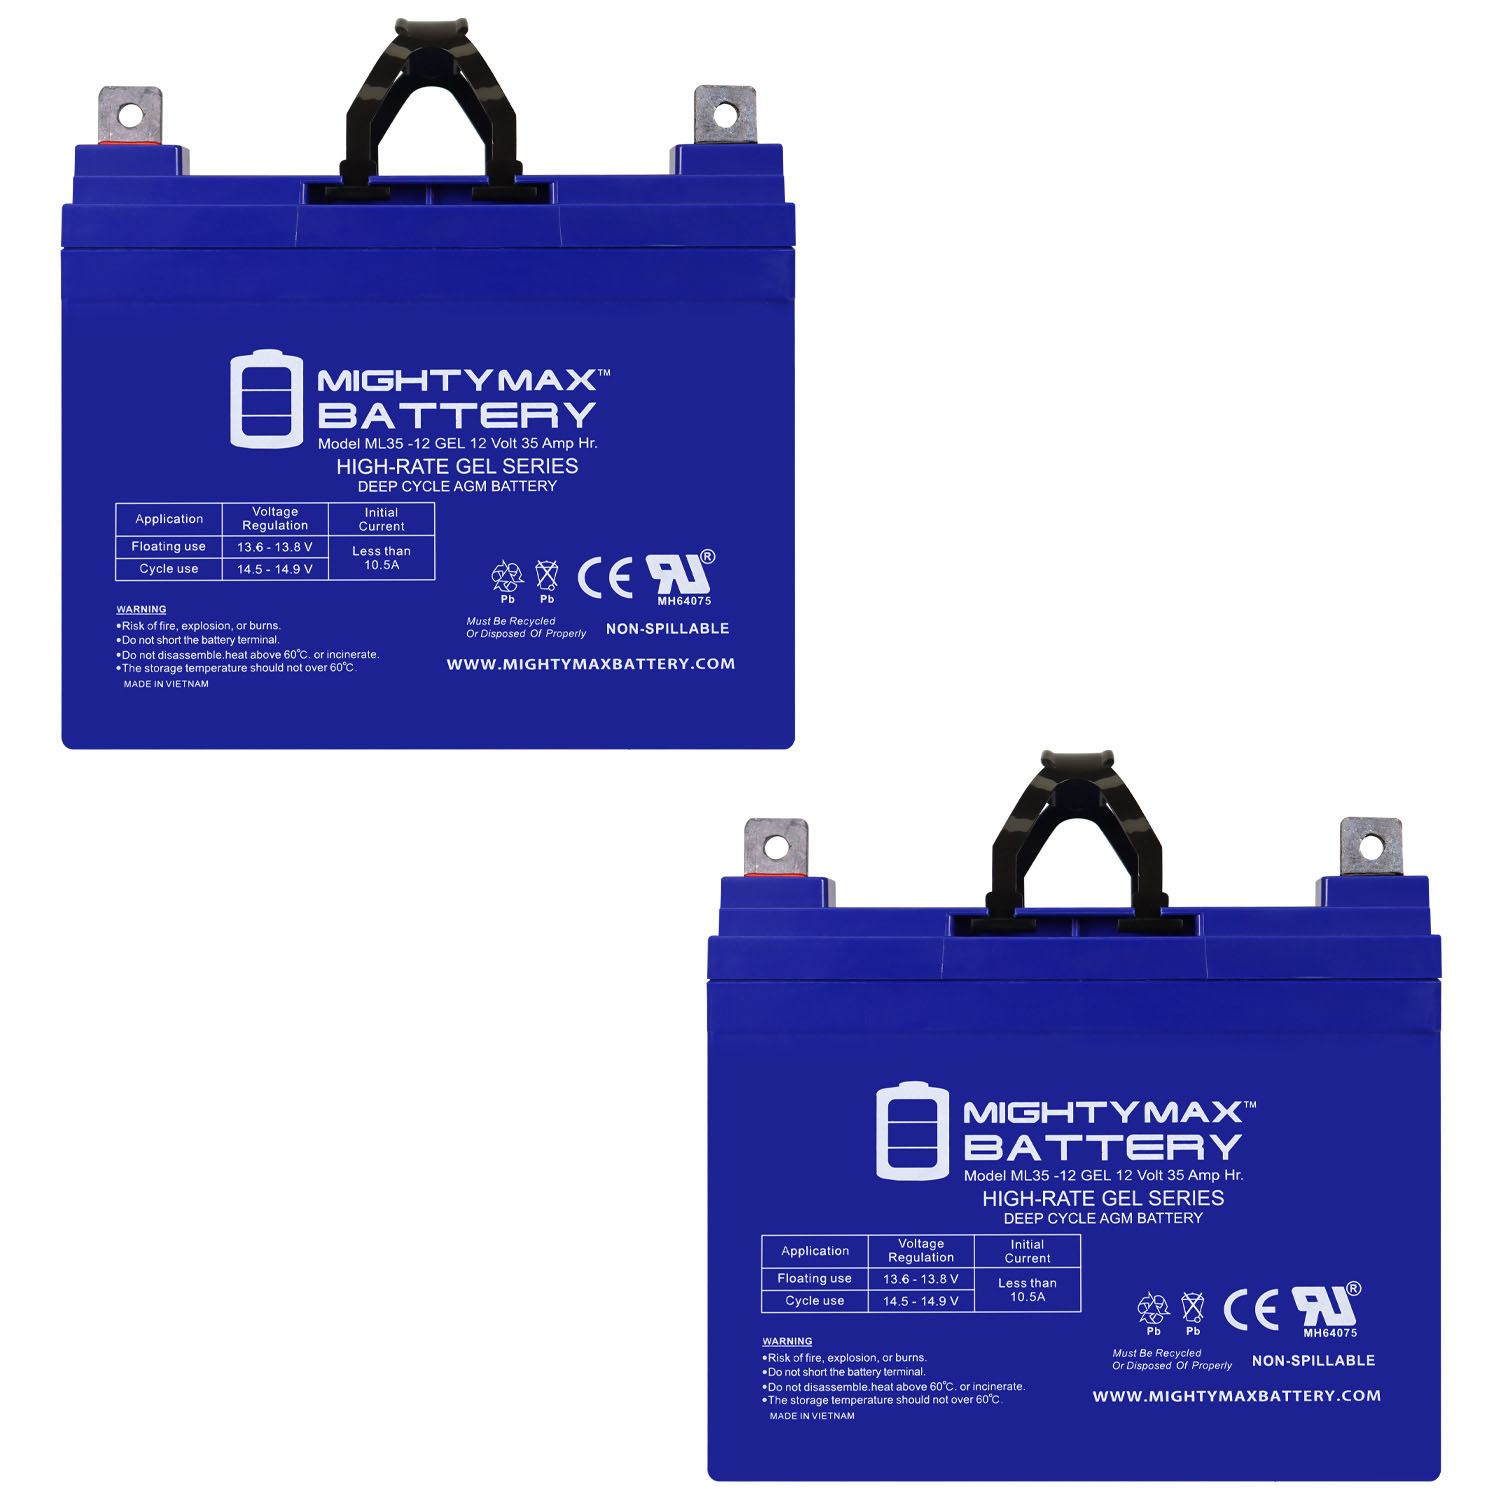 12V 35AH GEL NB Replacement Battery Compatible with Pride Mobility Wheelchair Jazzy 1103 - 2 Pack